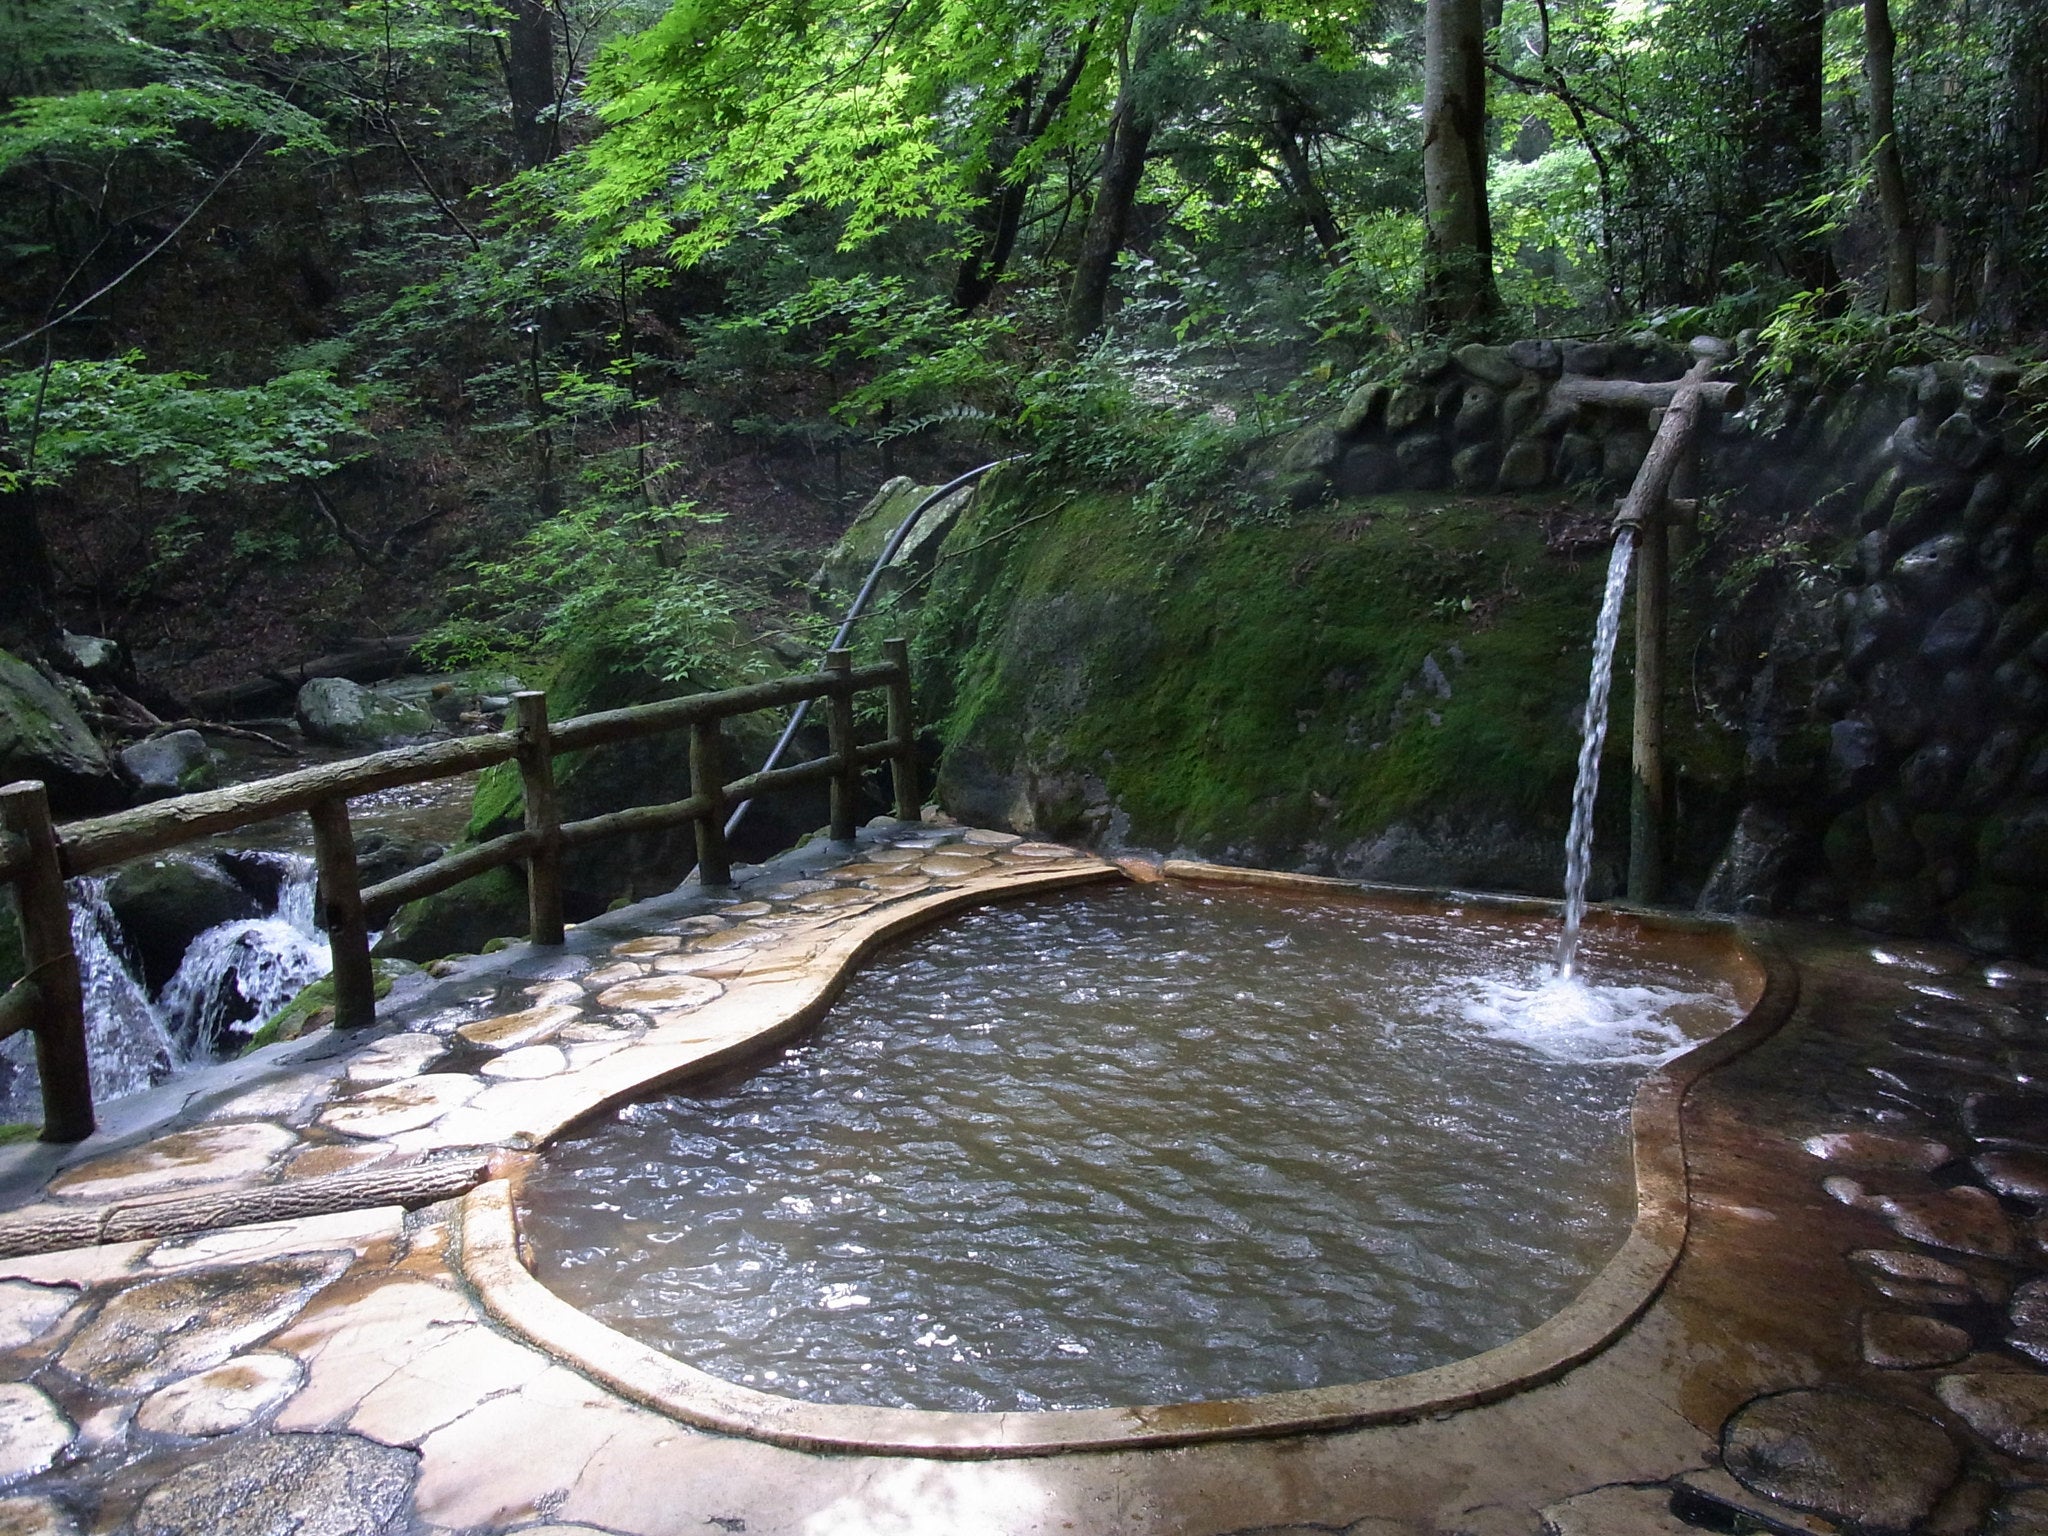 The Fudo no Yu hot springs, where around 60 people would visit each weekend